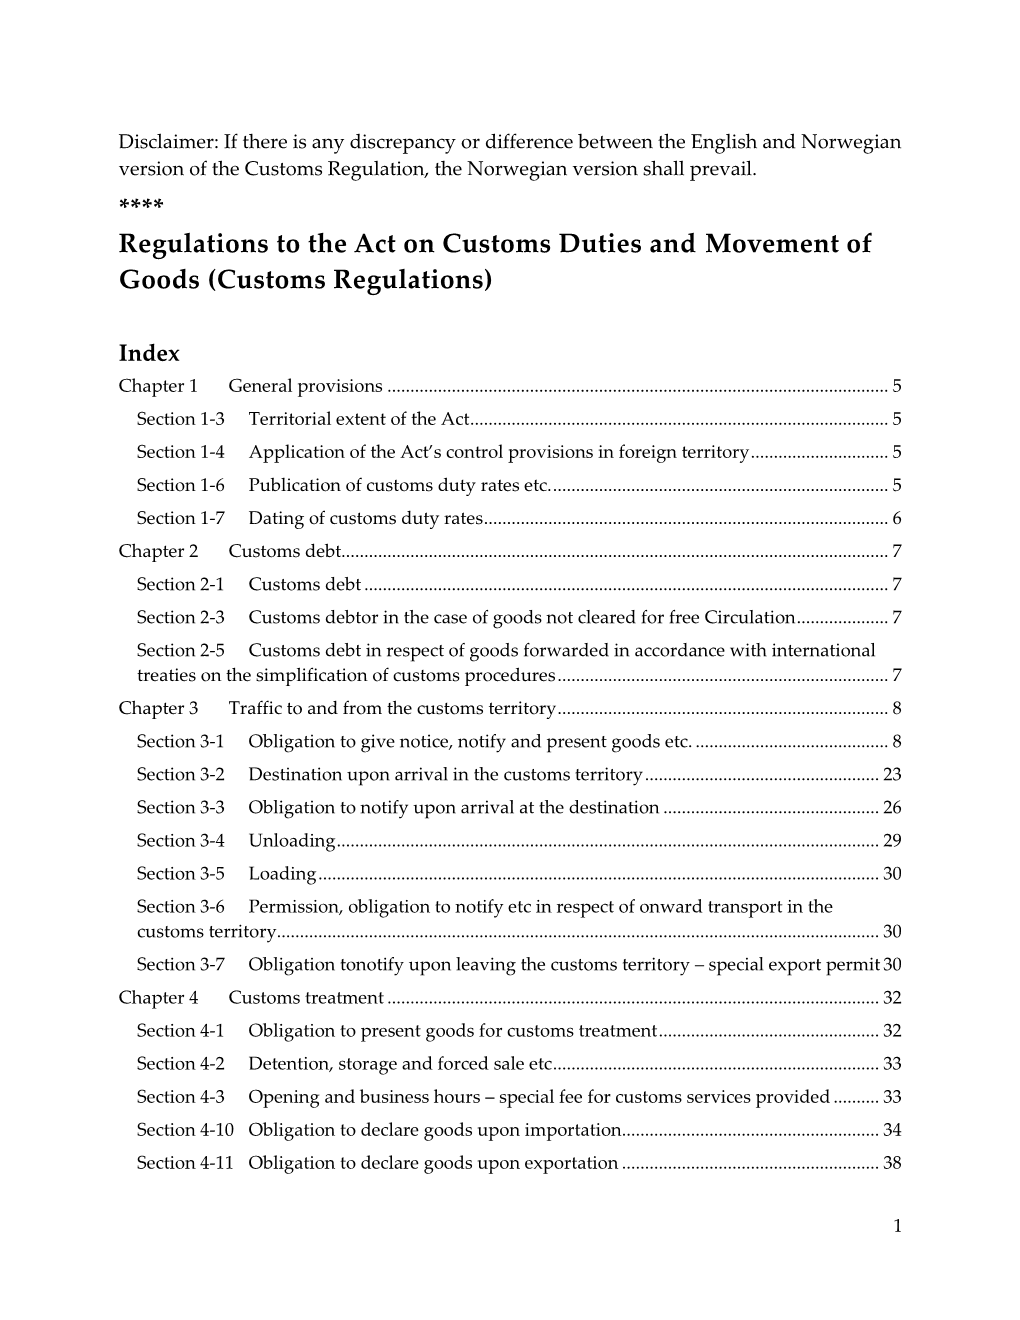 Regulations to the Act on Customs Duties and Movement of Goods (Customs Regulations)